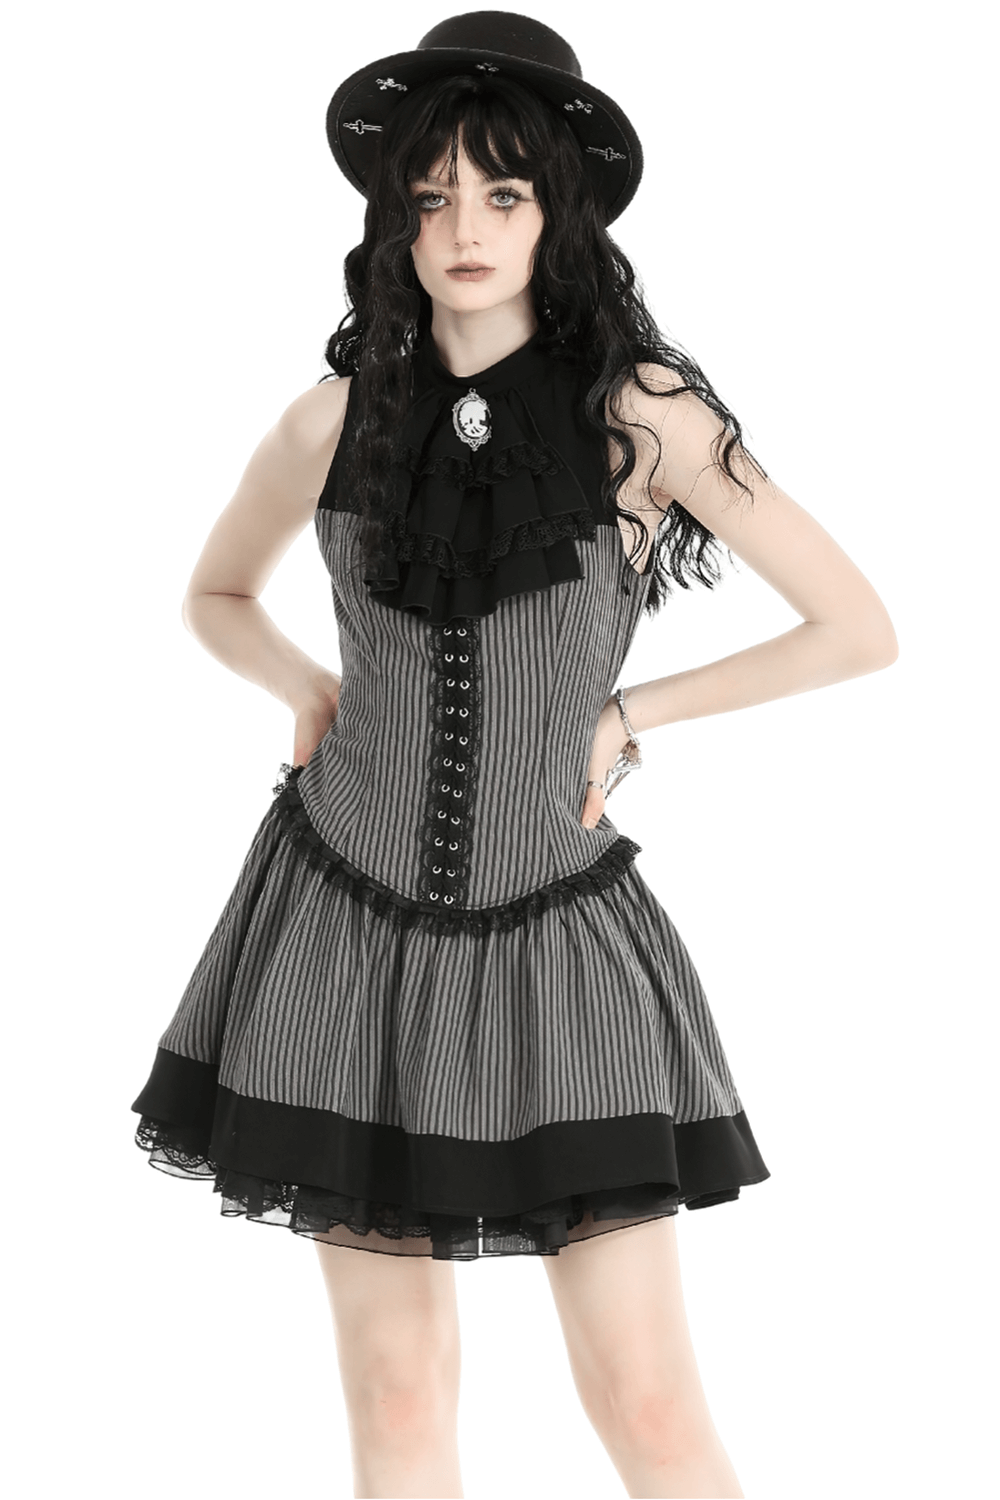 Elegant Striped Ruffle Dress with Brooch Accent